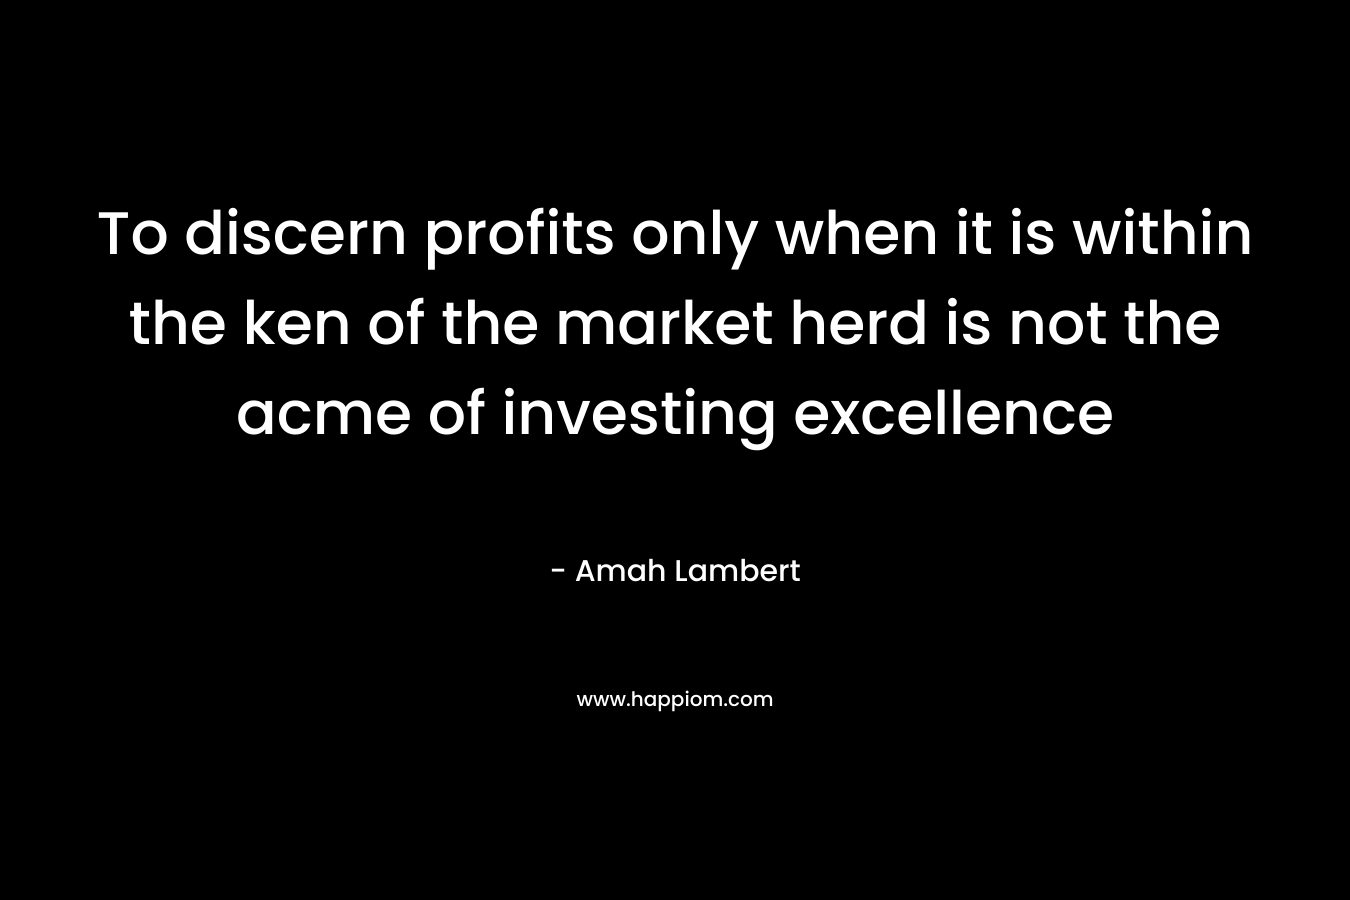 To discern profits only when it is within the ken of the market herd is not the acme of investing excellence – Amah Lambert